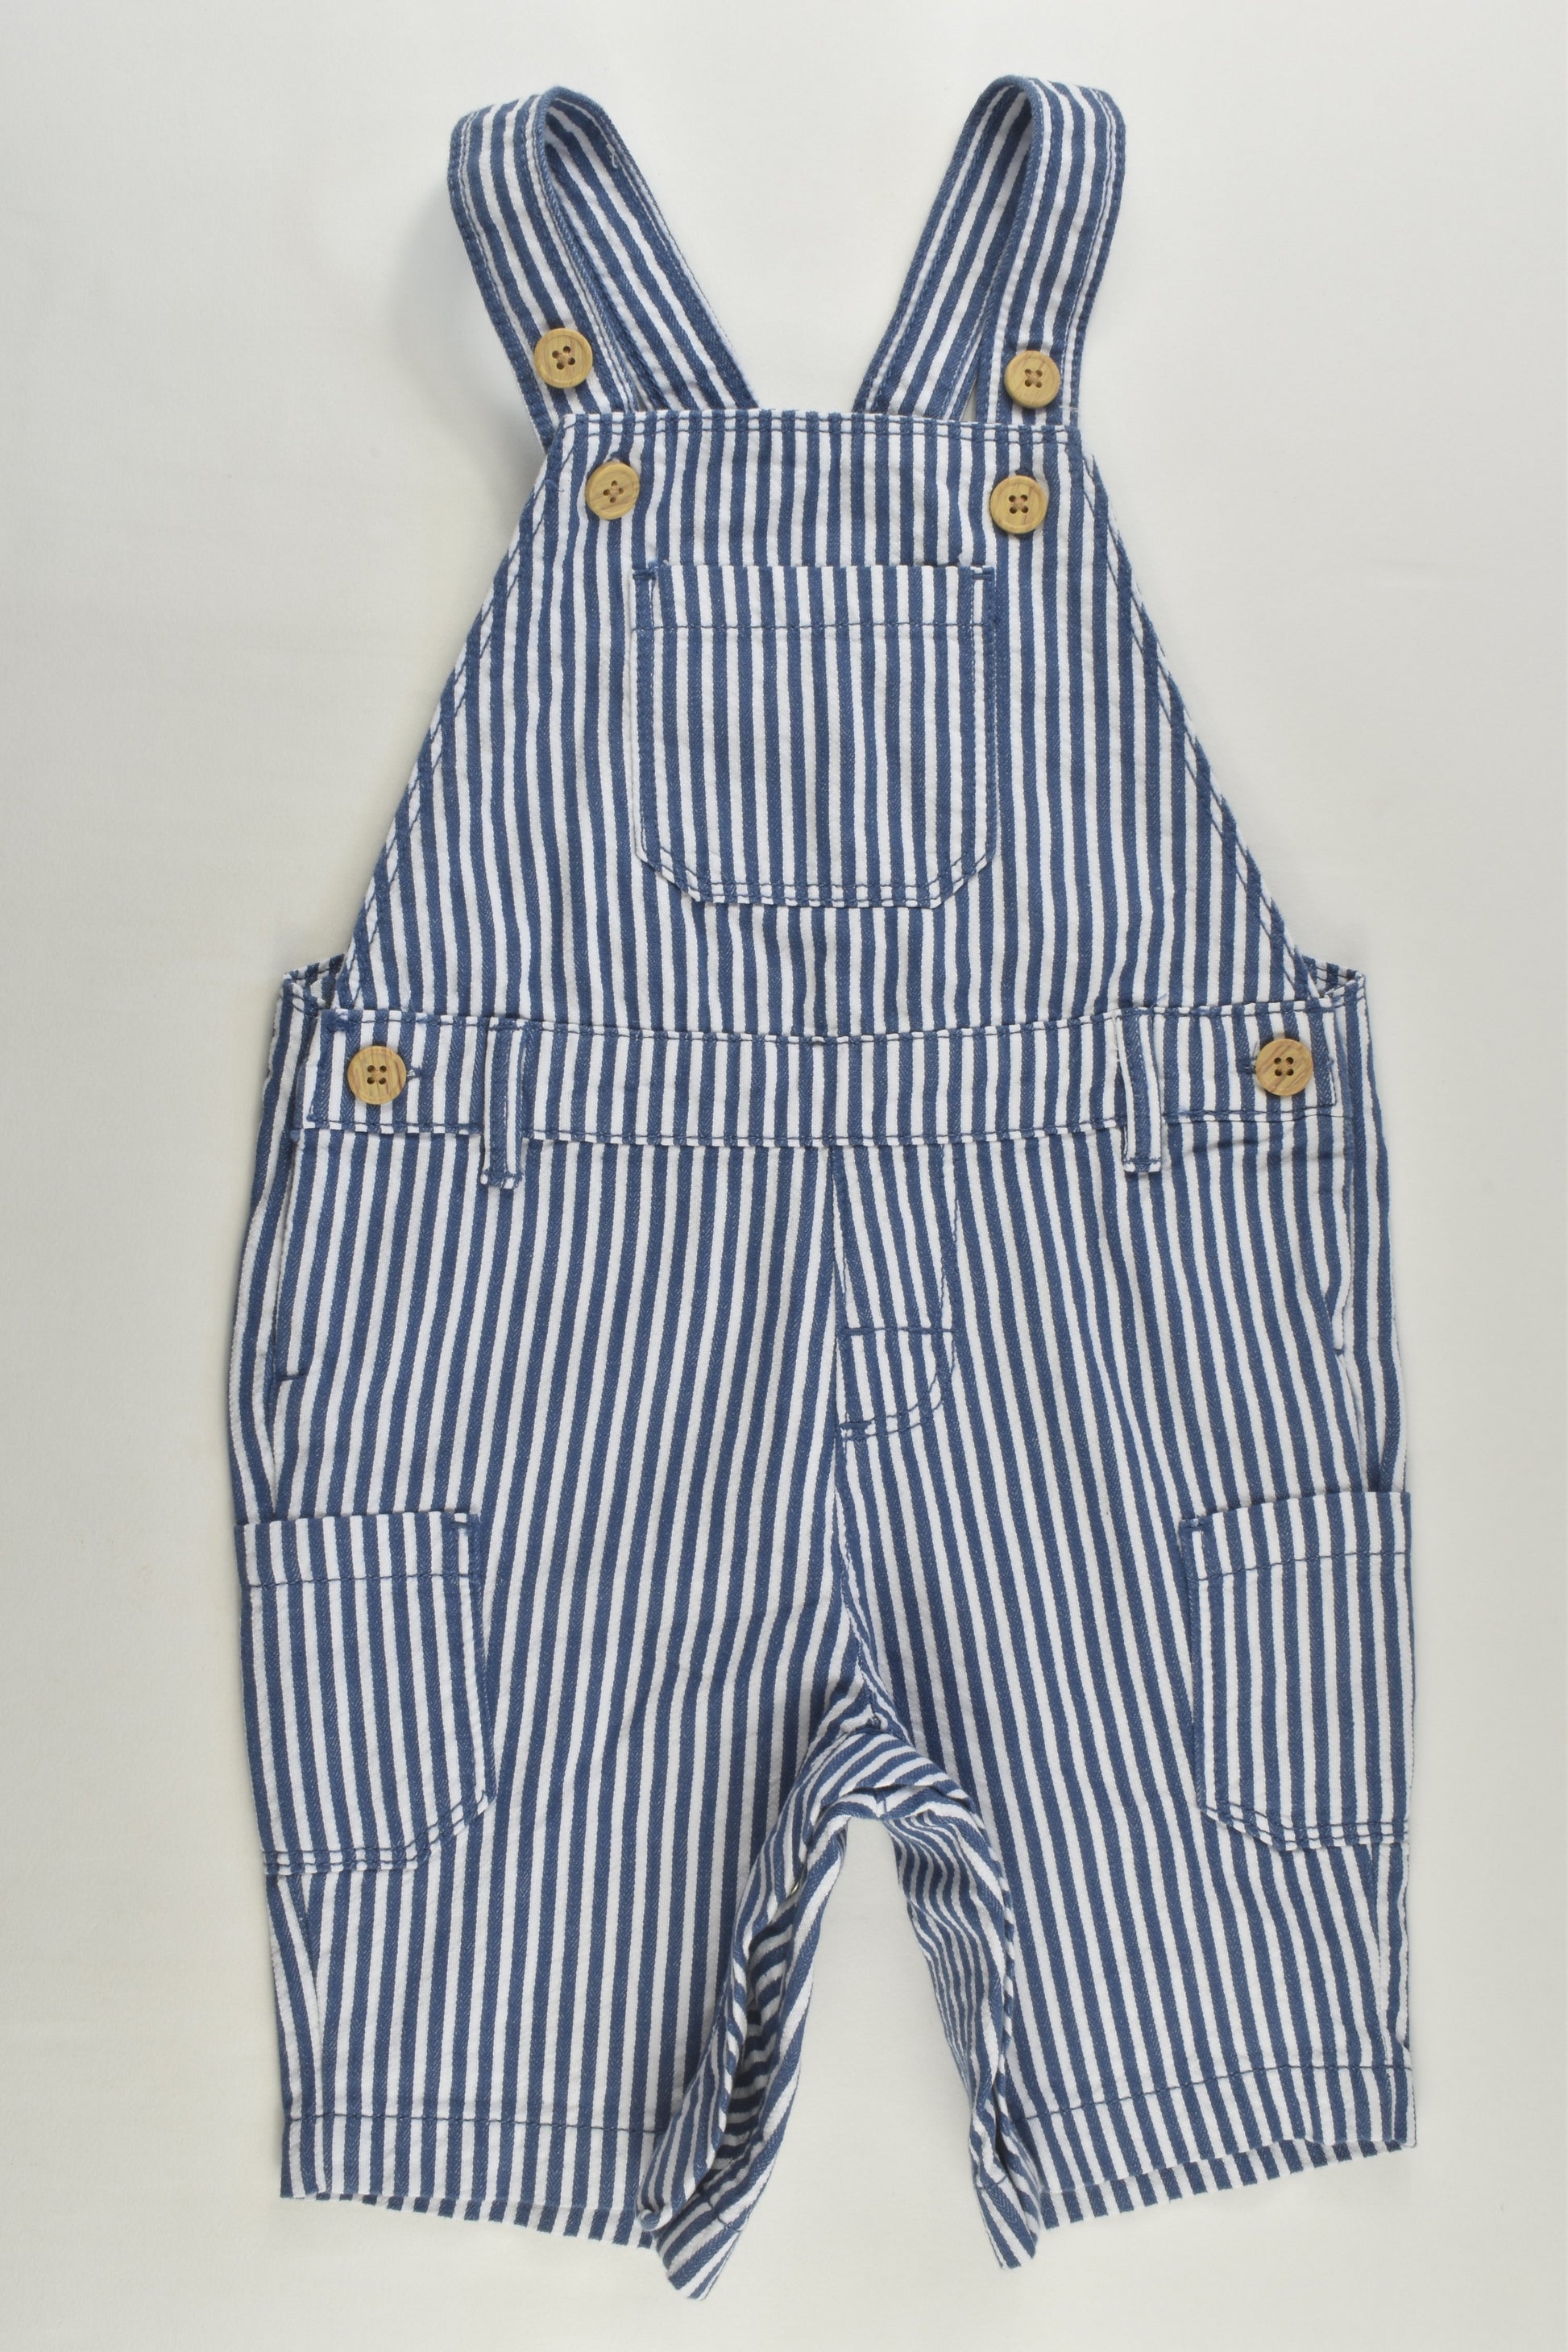 Target Size 2 (18-24 months) Striped Short Overalls